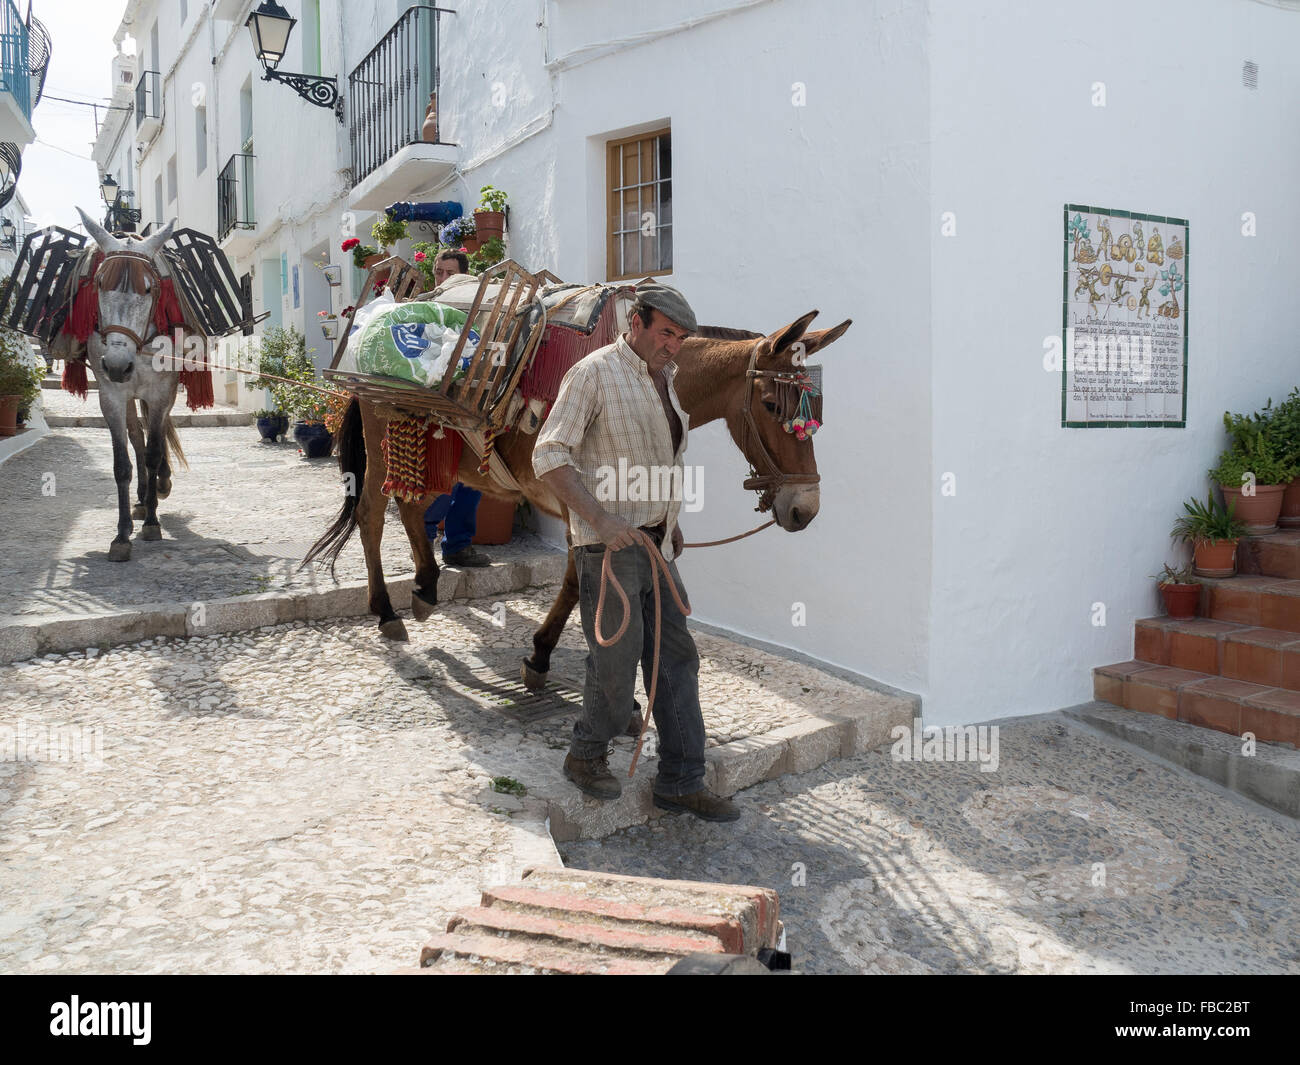 Donkeys Carrying Building Materials in Narrow Streets. Frigiliana a white town near Nerja, Costa Del Sol, Andalusia, Spain, Stock Photo